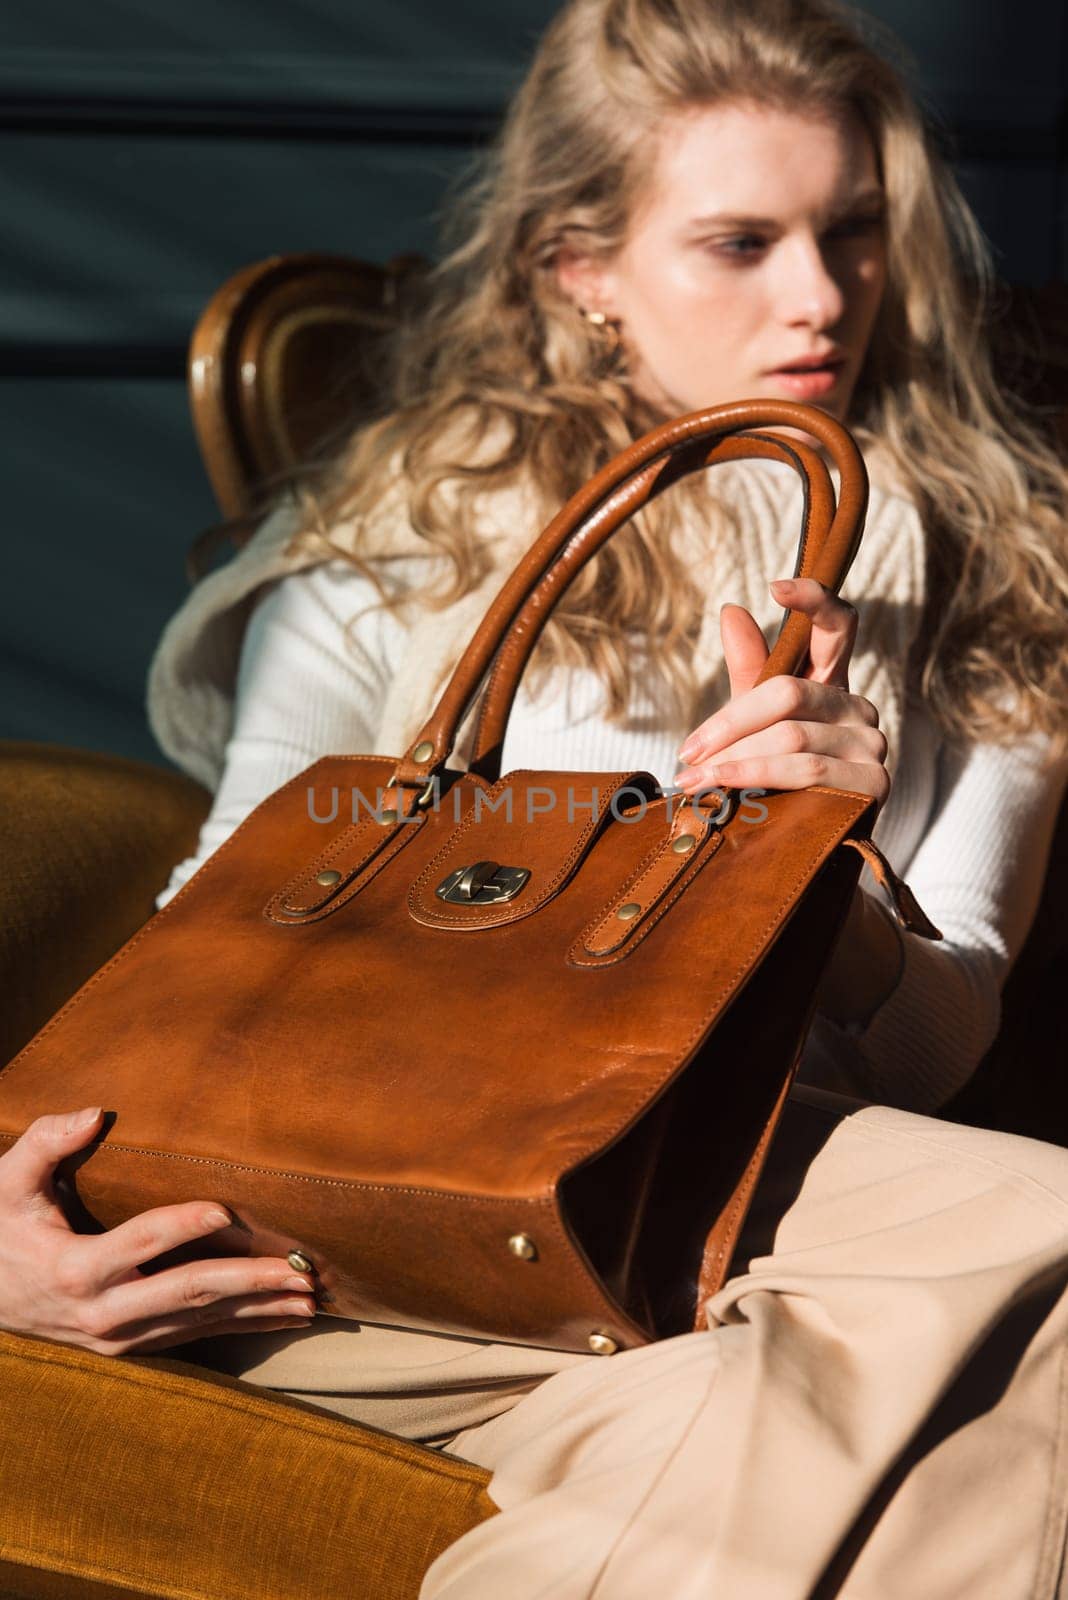 beautiful curly blond hair woman posing with a small shopper brown bag in a vintage chair. Model wearing stylish white sweater and classic trousers